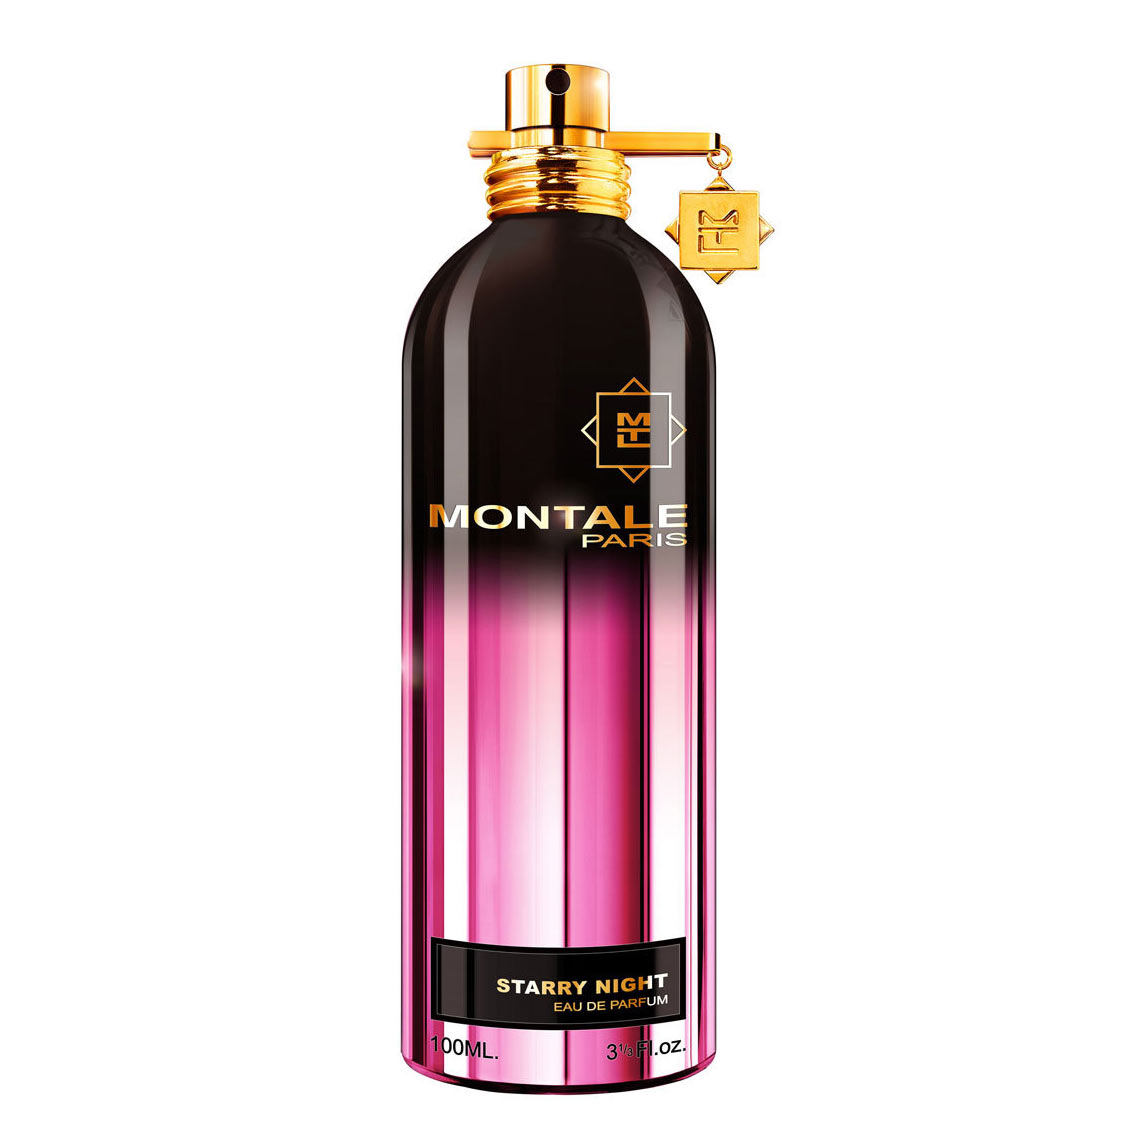 Starry-Nights-Montale